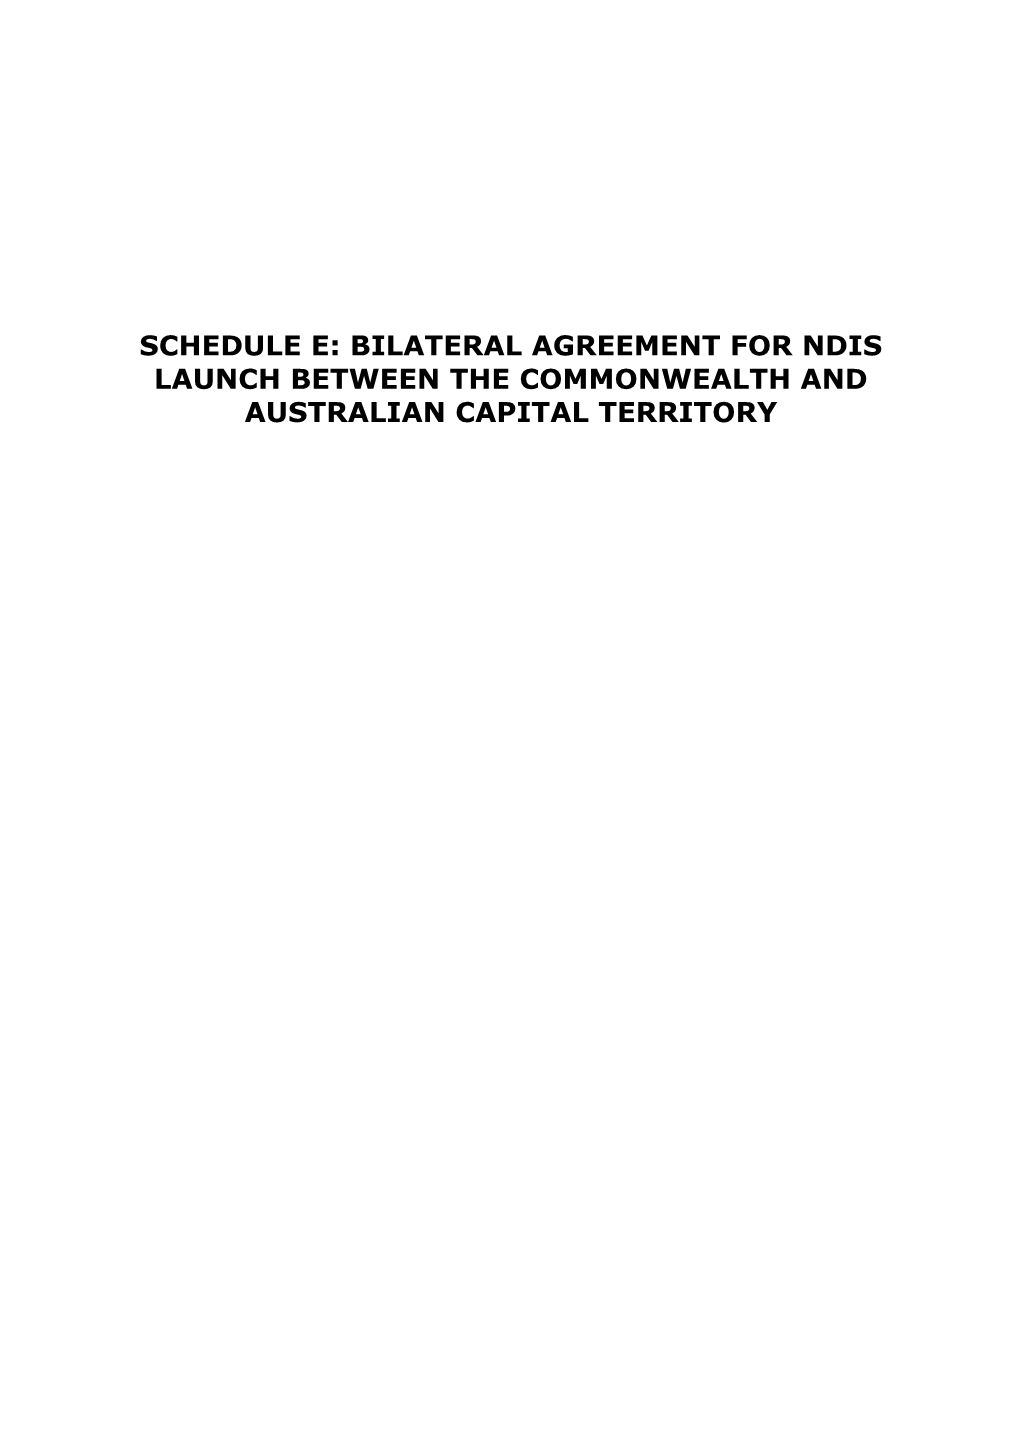 Schedule E: Bilateral Agreement for Ndis Launch Between the Commonwealth and Australian